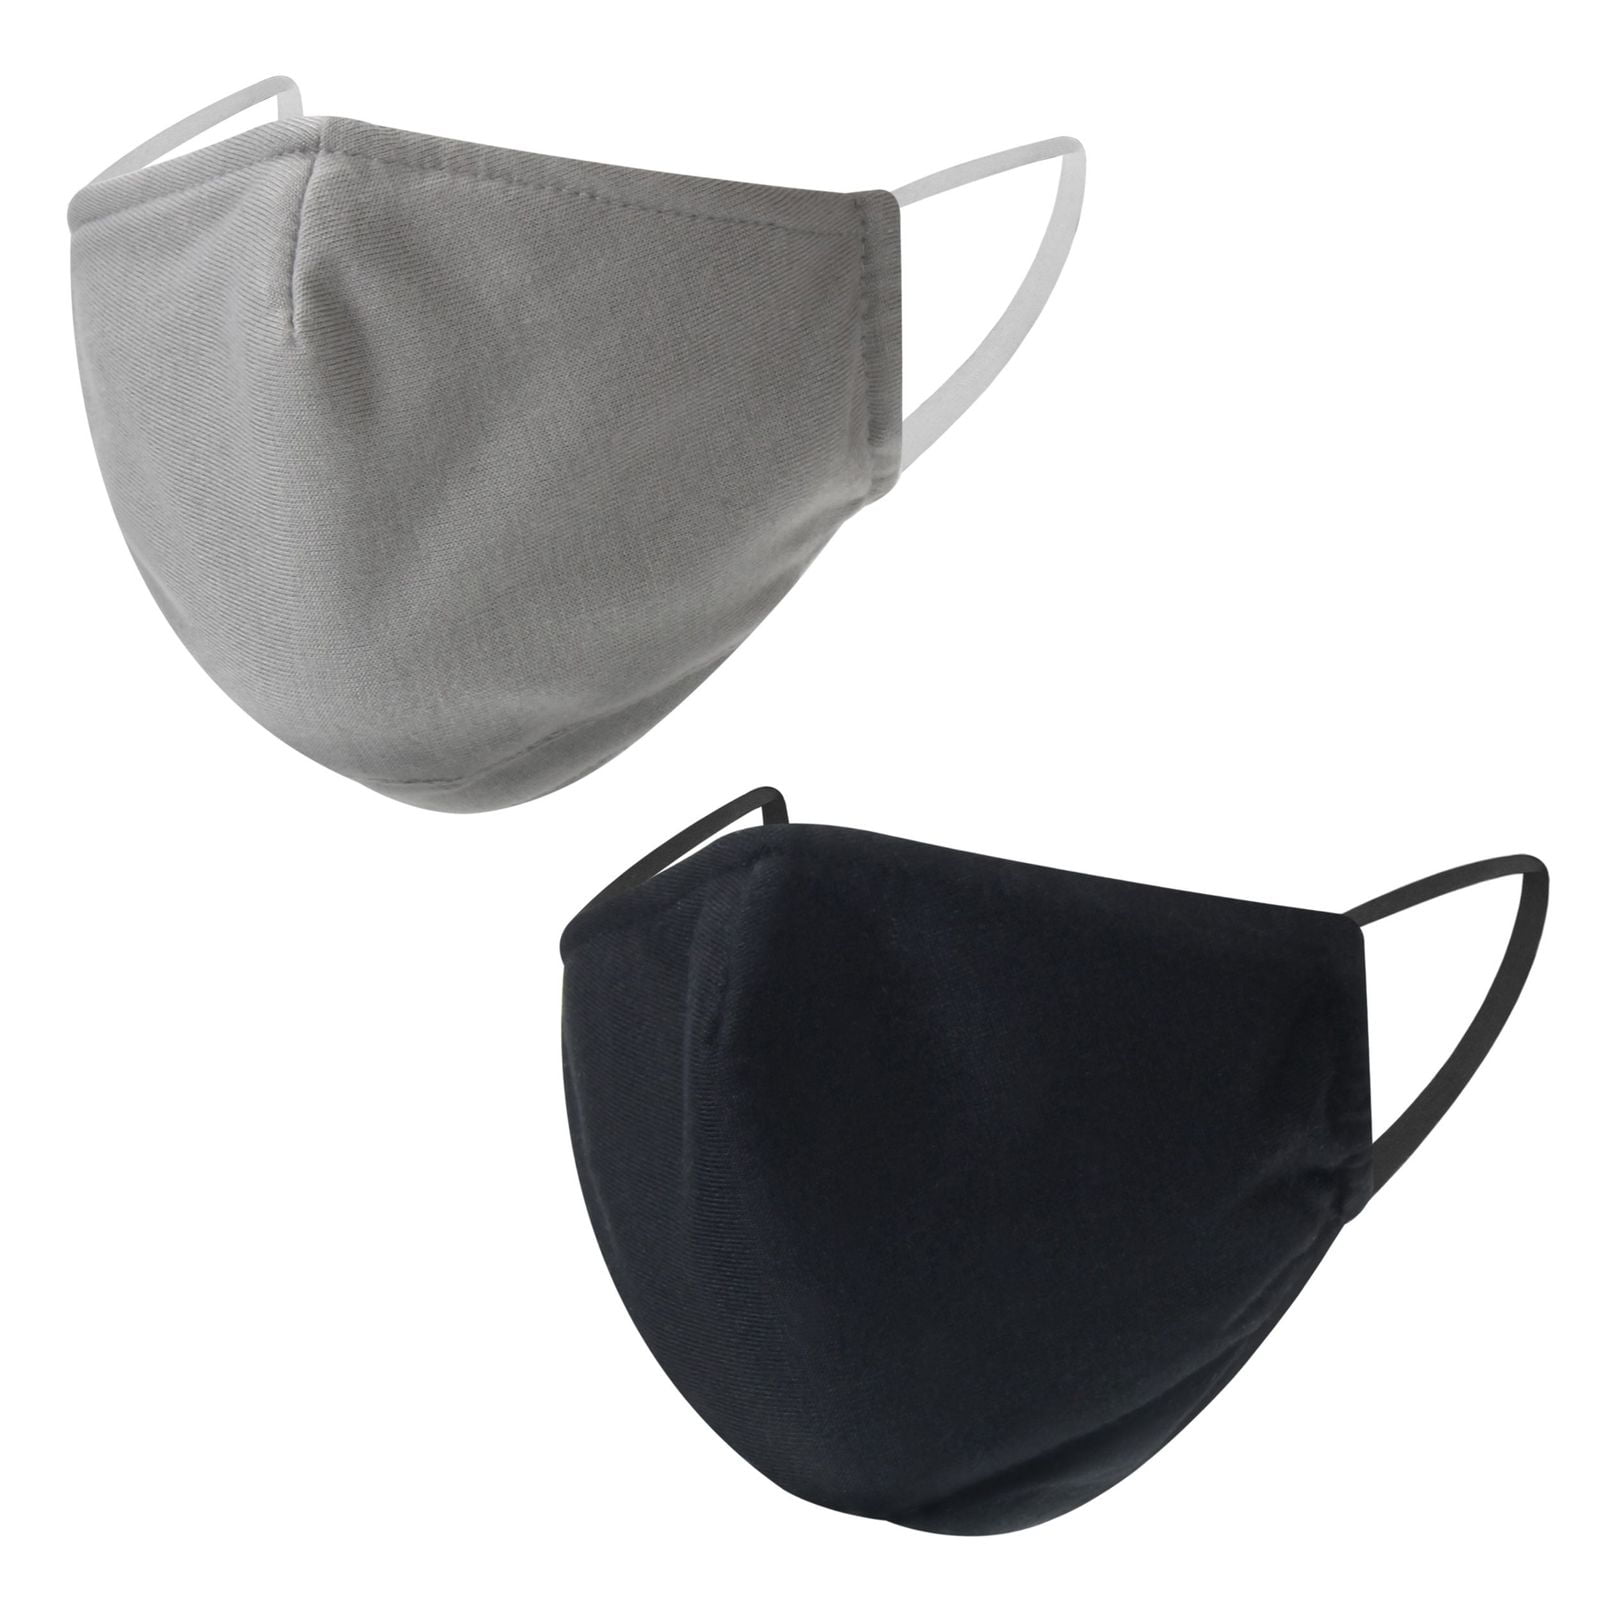 Details about   USA Stock~Washable Outdoor Cotton Mask With 2 Filters Riding Face Respirator 